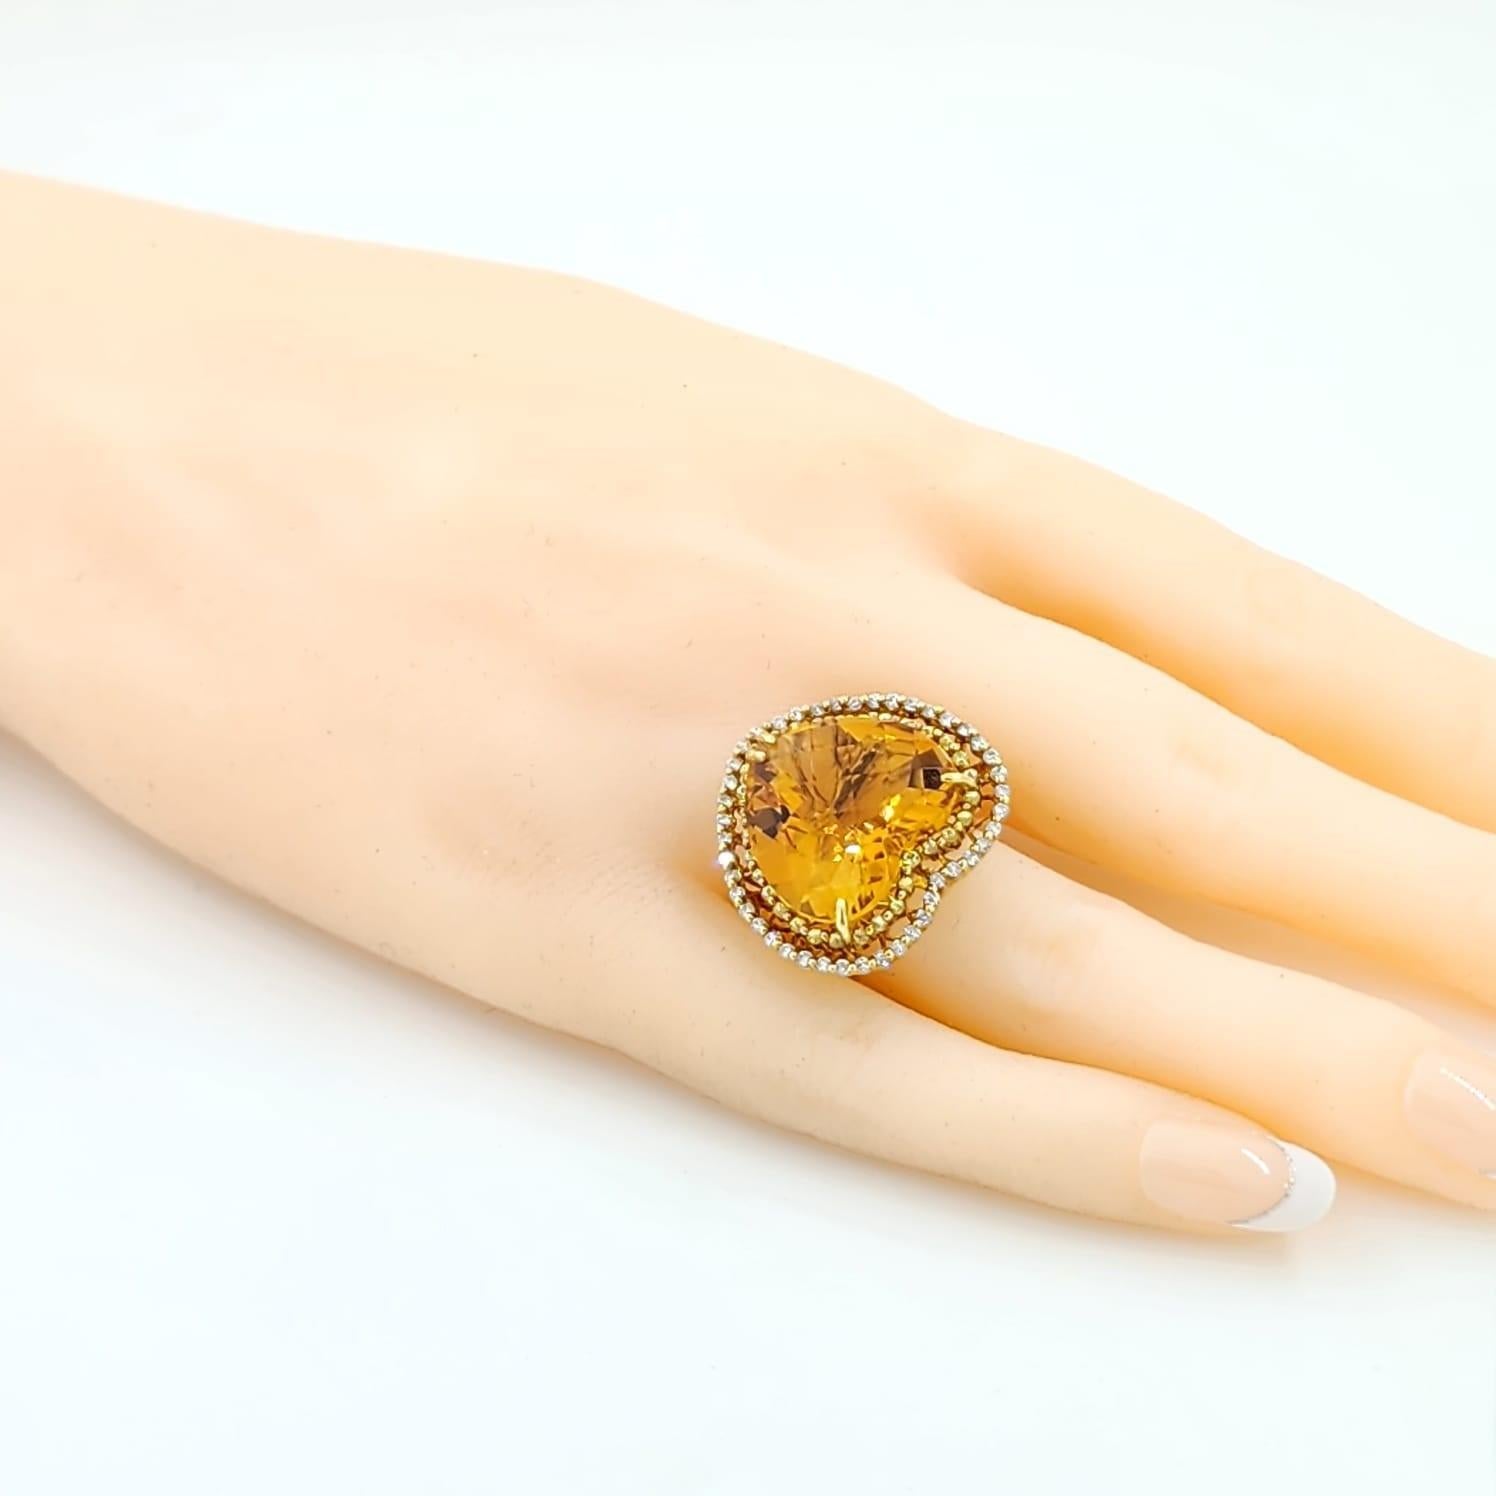 Women's Vintage 14.81 Ct Citrine Heart Cut Diamond Cocktail Ring in 18 Karat Yellow Gold For Sale